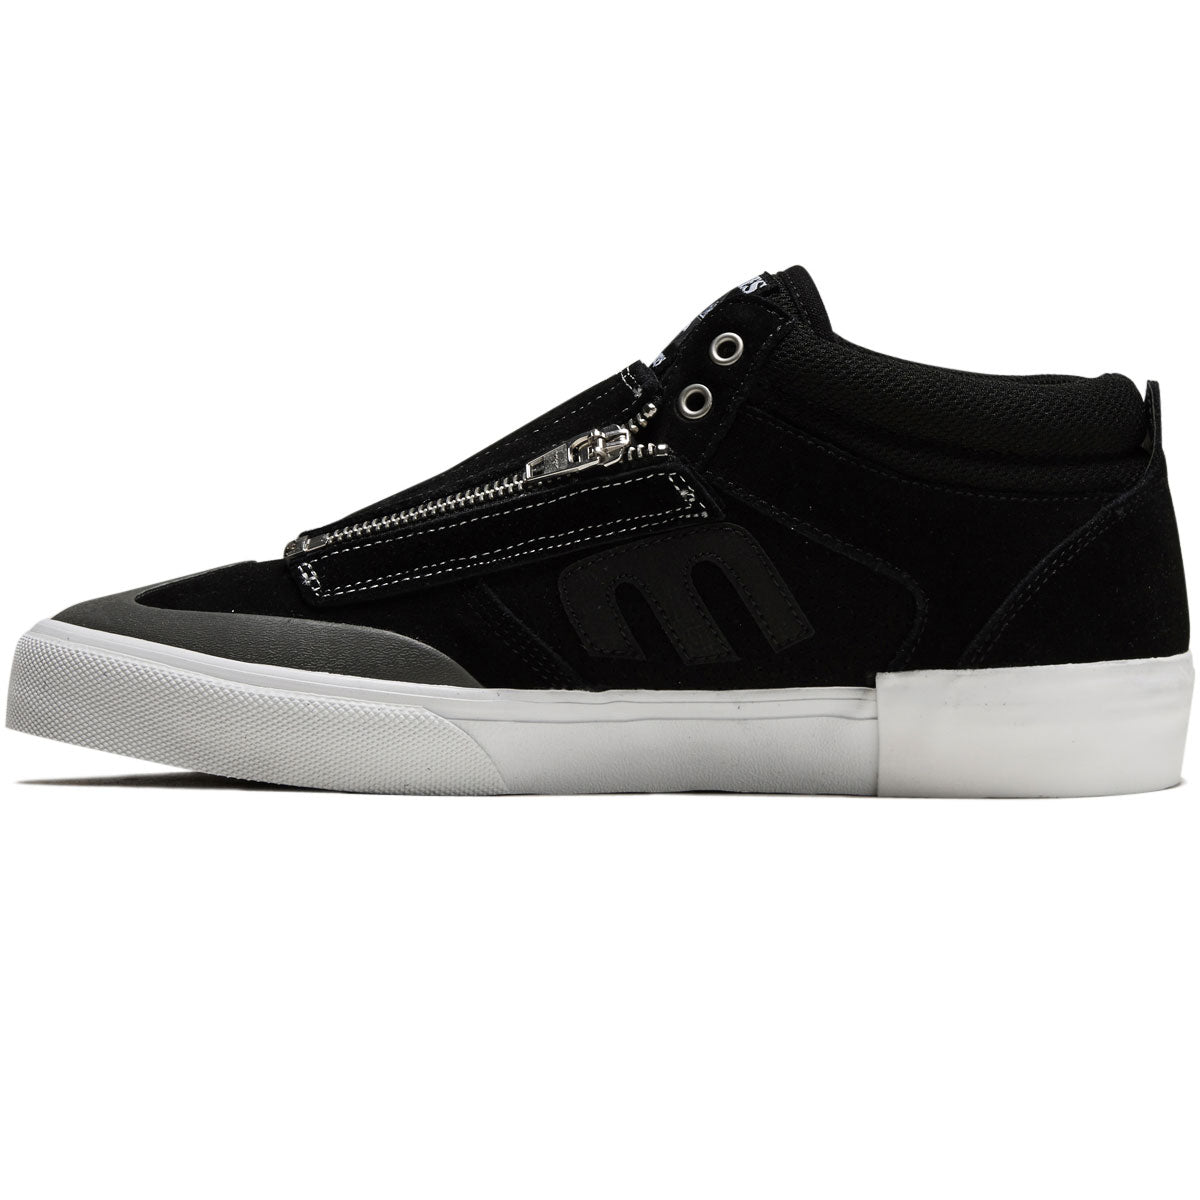 Etnies Windrow Vulc Mid Shoes - Black/White/Silver image 2